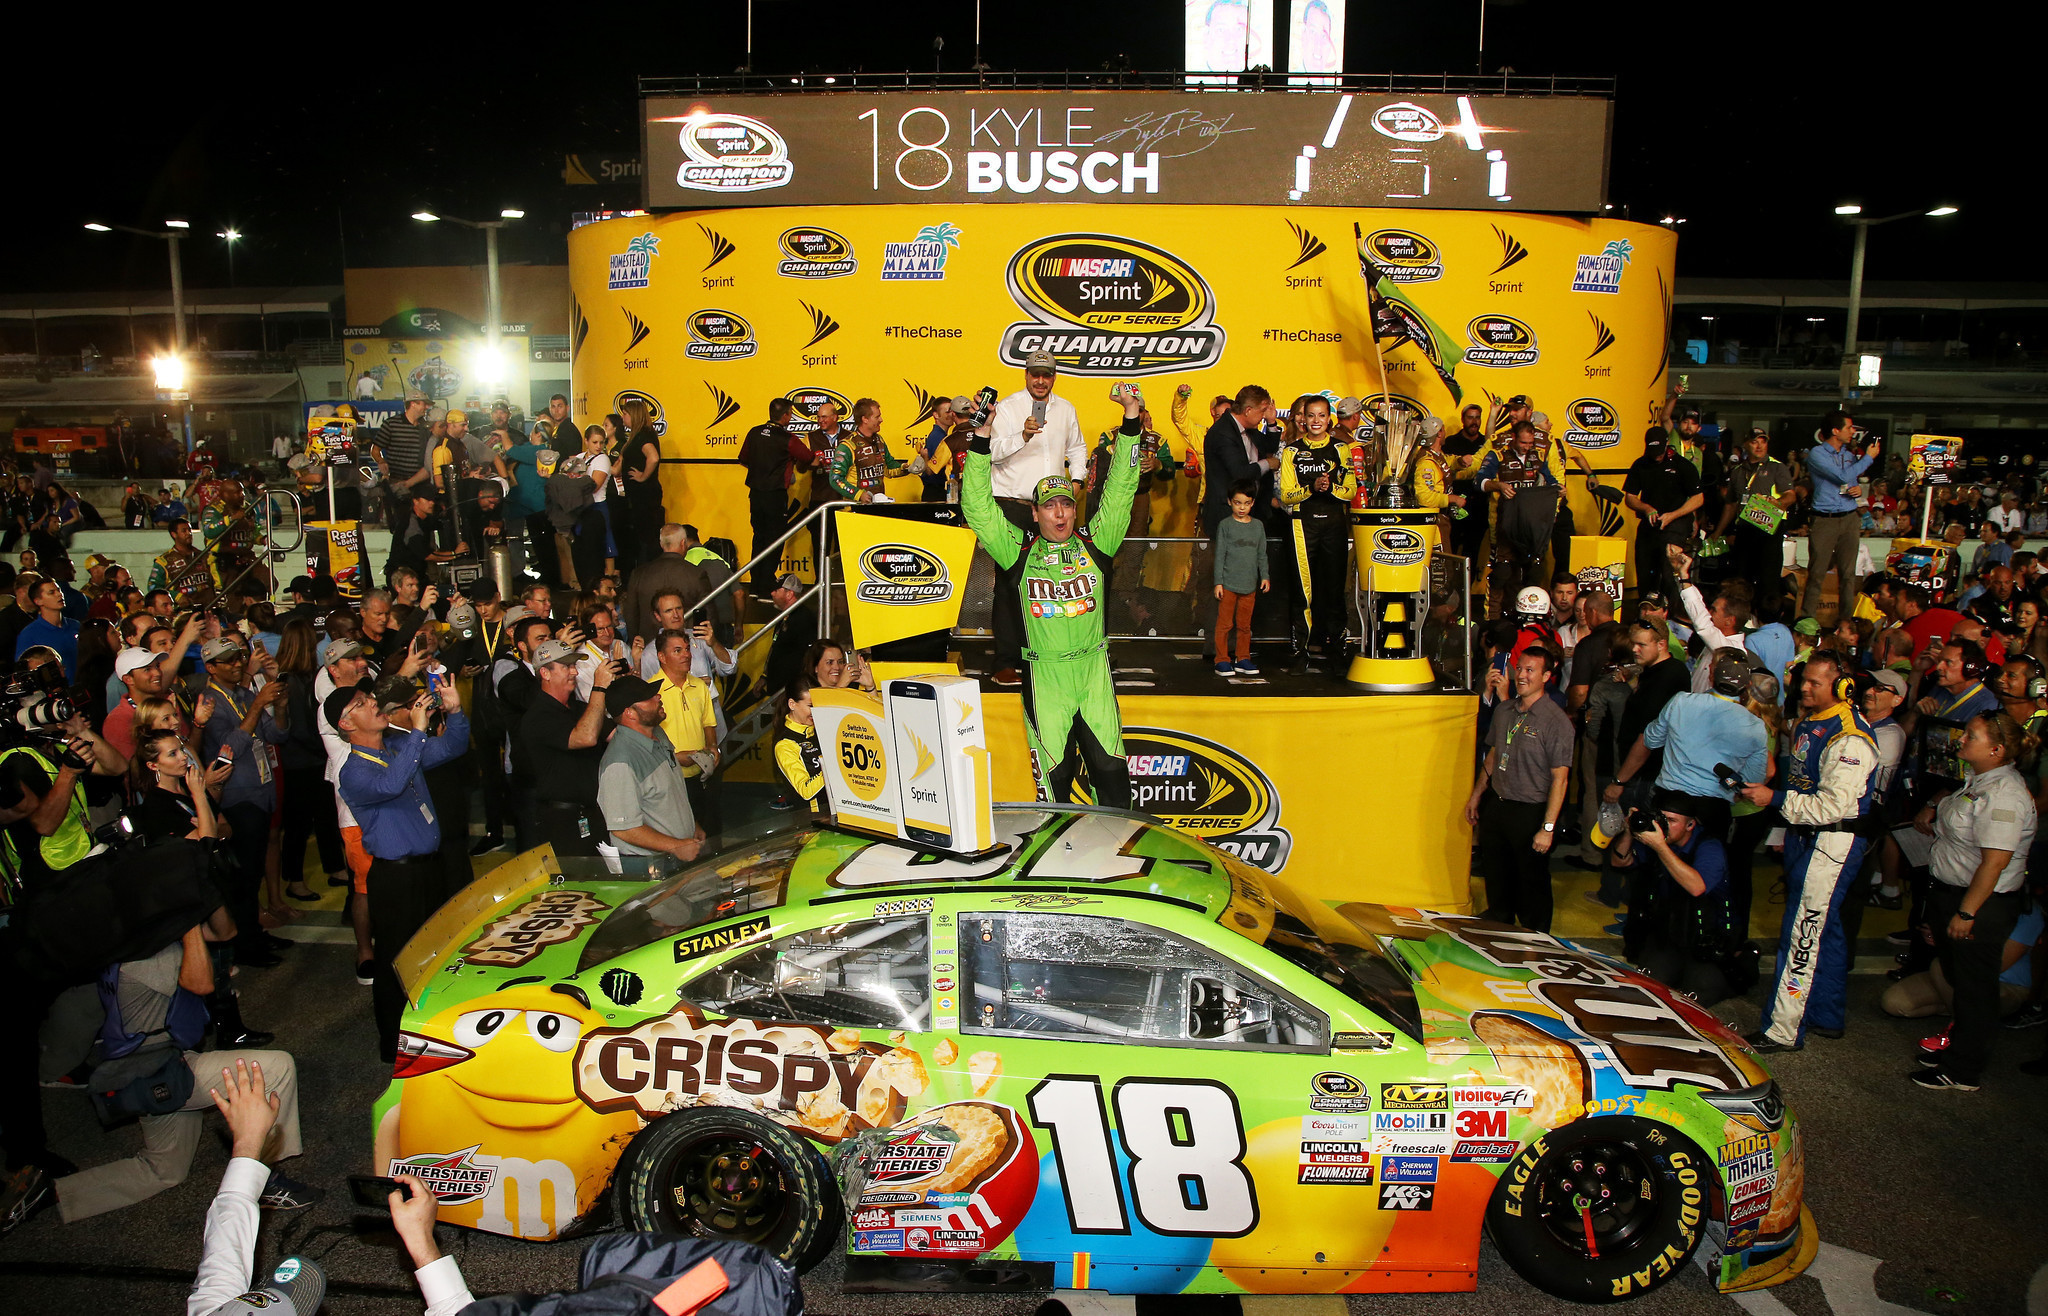 Pictures: 2015 NASCAR Sprint Cup race winners - Orlando Sentinel2048 x 1316